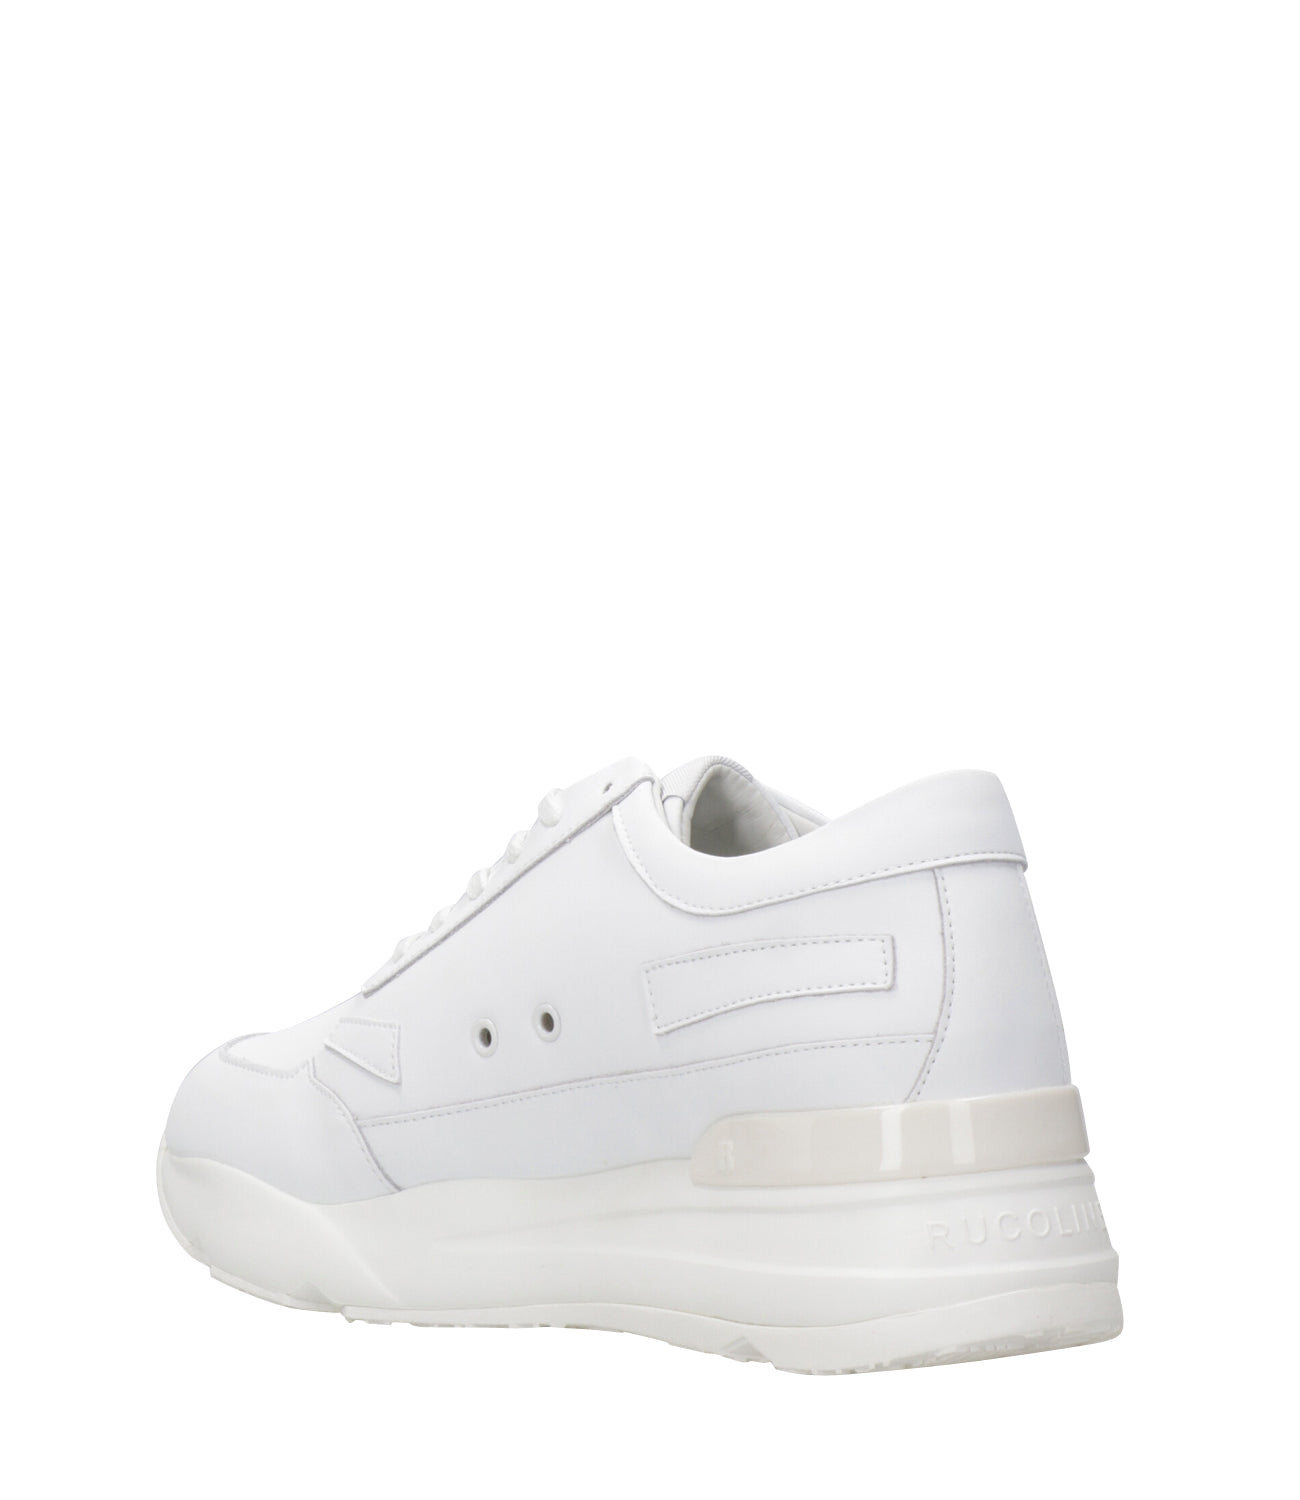 Rucoline | Sneakers R-Evolve Soft Bianche